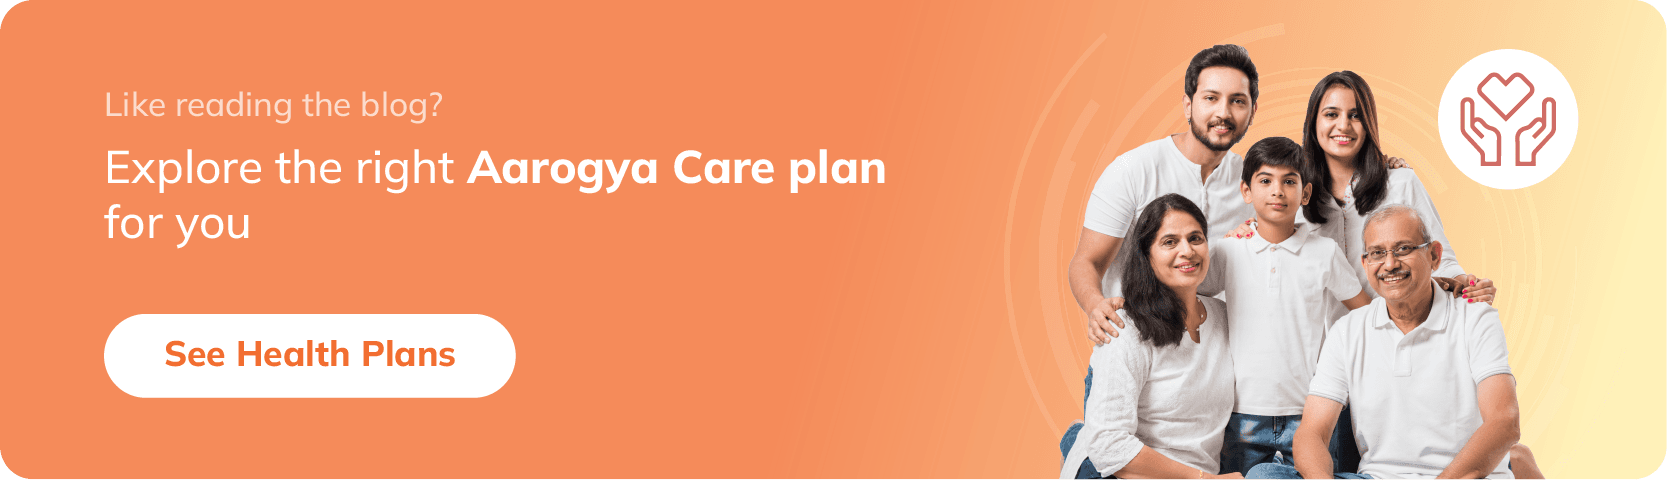 Network Discount in Aarogya Care: What You Need to Know banner